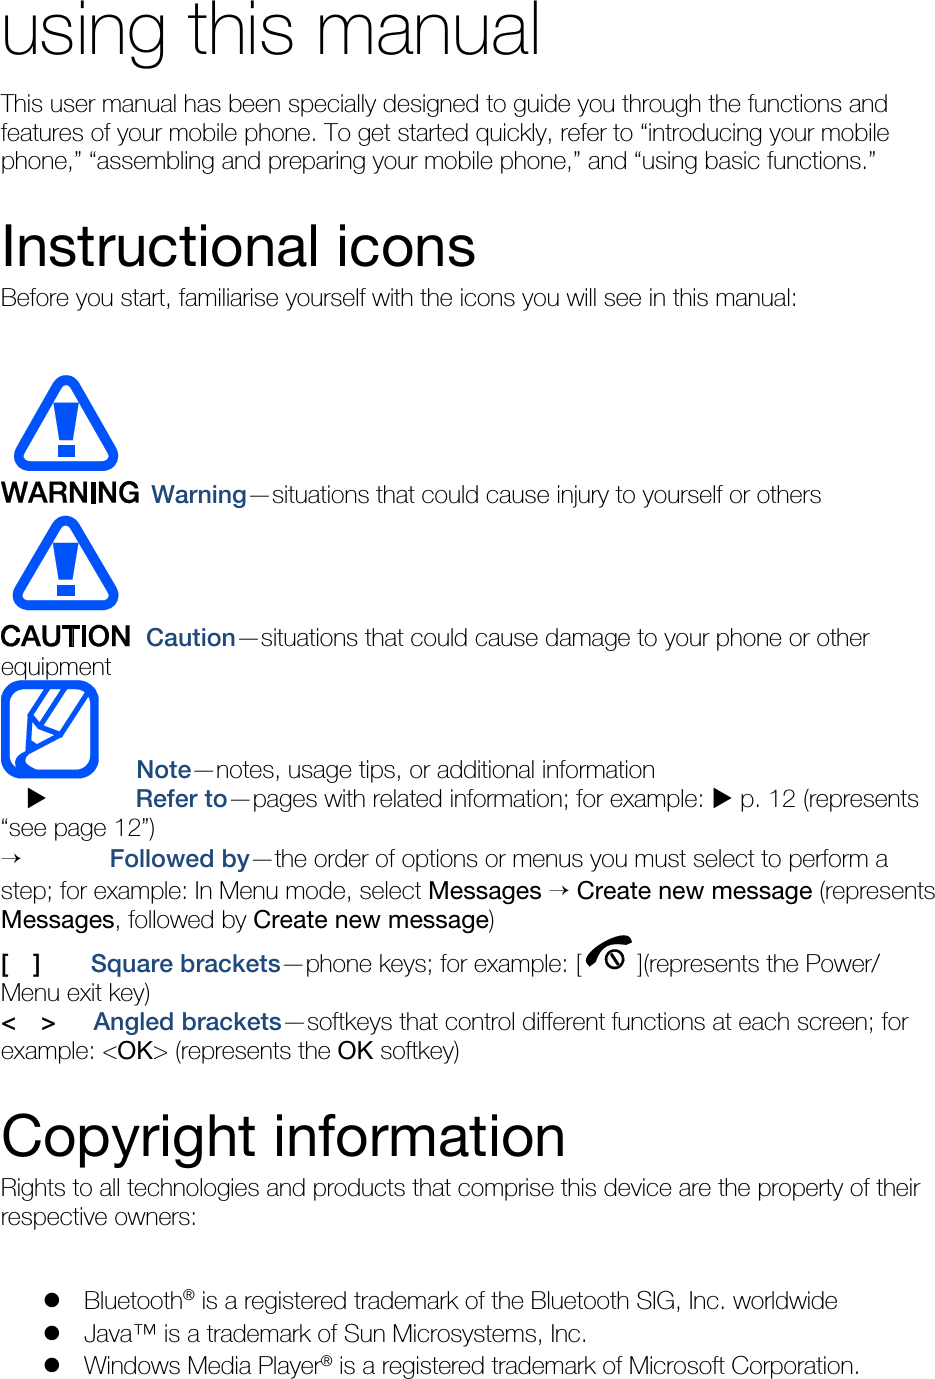 using this manual This user manual has been specially designed to guide you through the functions and features of your mobile phone. To get started quickly, refer to “introducing your mobile phone,” “assembling and preparing your mobile phone,” and “using basic functions.”  Instructional icons Before you start, familiarise yourself with the icons you will see in this manual:     Warning—situations that could cause injury to yourself or others  Caution—situations that could cause damage to your phone or other equipment    Note—notes, usage tips, or additional information          Refer to—pages with related information; for example:  p. 12 (represents “see page 12”) →       Followed by—the order of options or menus you must select to perform a step; for example: In Menu mode, select Messages → Create new message (represents Messages, followed by Create new message) [  ]    Square brackets—phone keys; for example: [ ](represents the Power/ Menu exit key) &lt;  &gt;   Angled brackets—softkeys that control different functions at each screen; for example: &lt;OK&gt; (represents the OK softkey)  Copyright information Rights to all technologies and products that comprise this device are the property of their respective owners:   Bluetooth® is a registered trademark of the Bluetooth SIG, Inc. worldwide  Java™ is a trademark of Sun Microsystems, Inc.  Windows Media Player® is a registered trademark of Microsoft Corporation. 